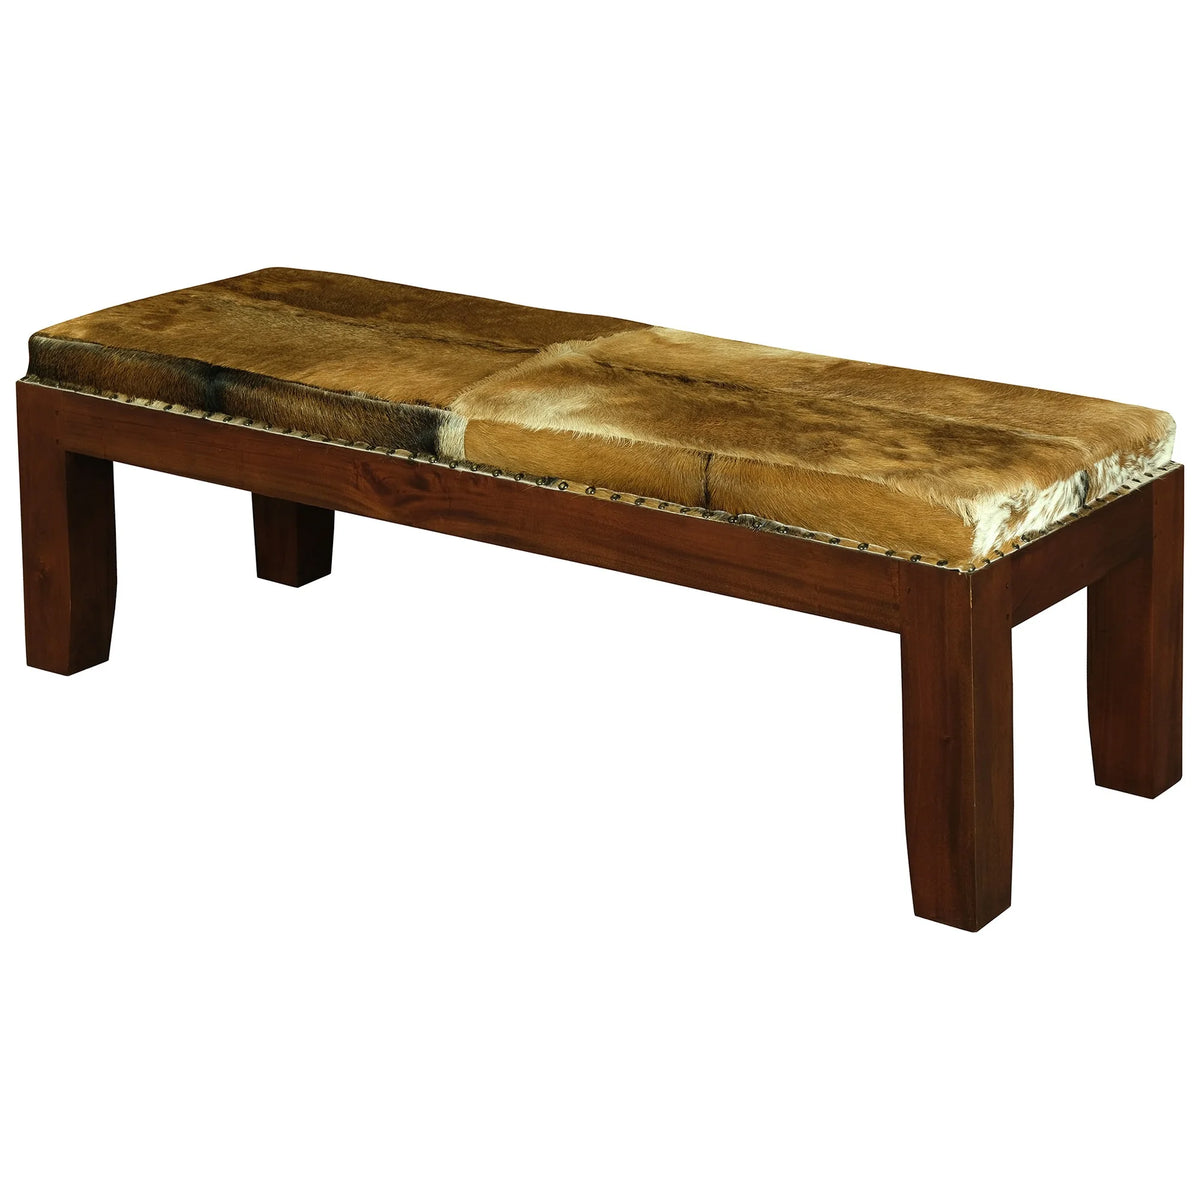 Zocca Solid Timber Double Bench with Goat Hide Seat